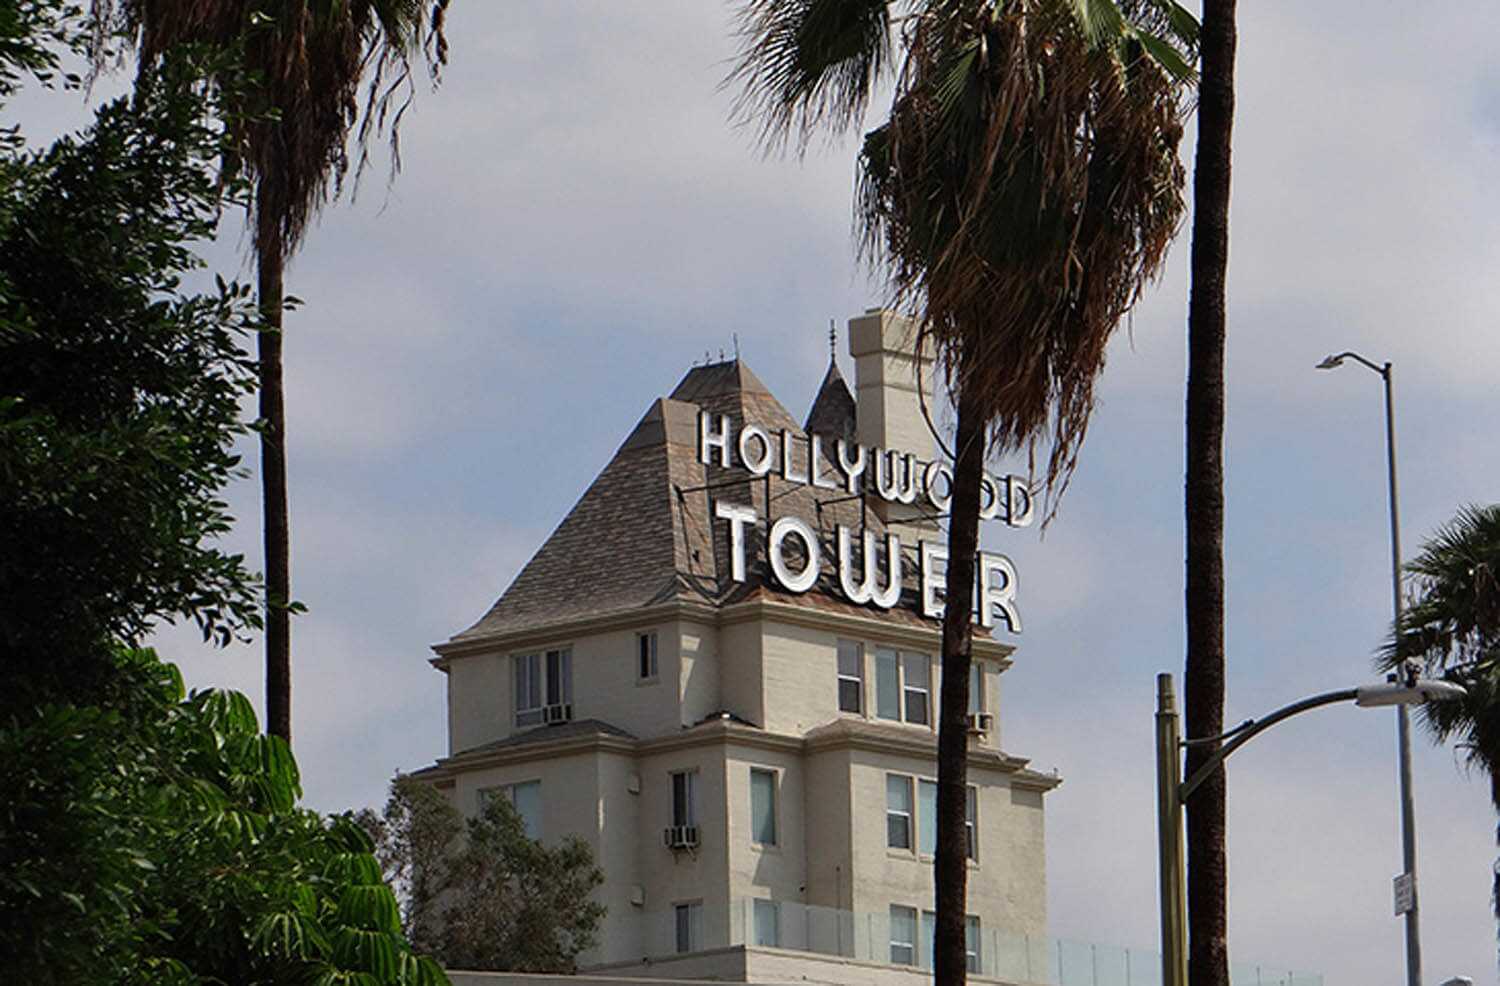 Los Angeles limo tours: Hollywood Tower